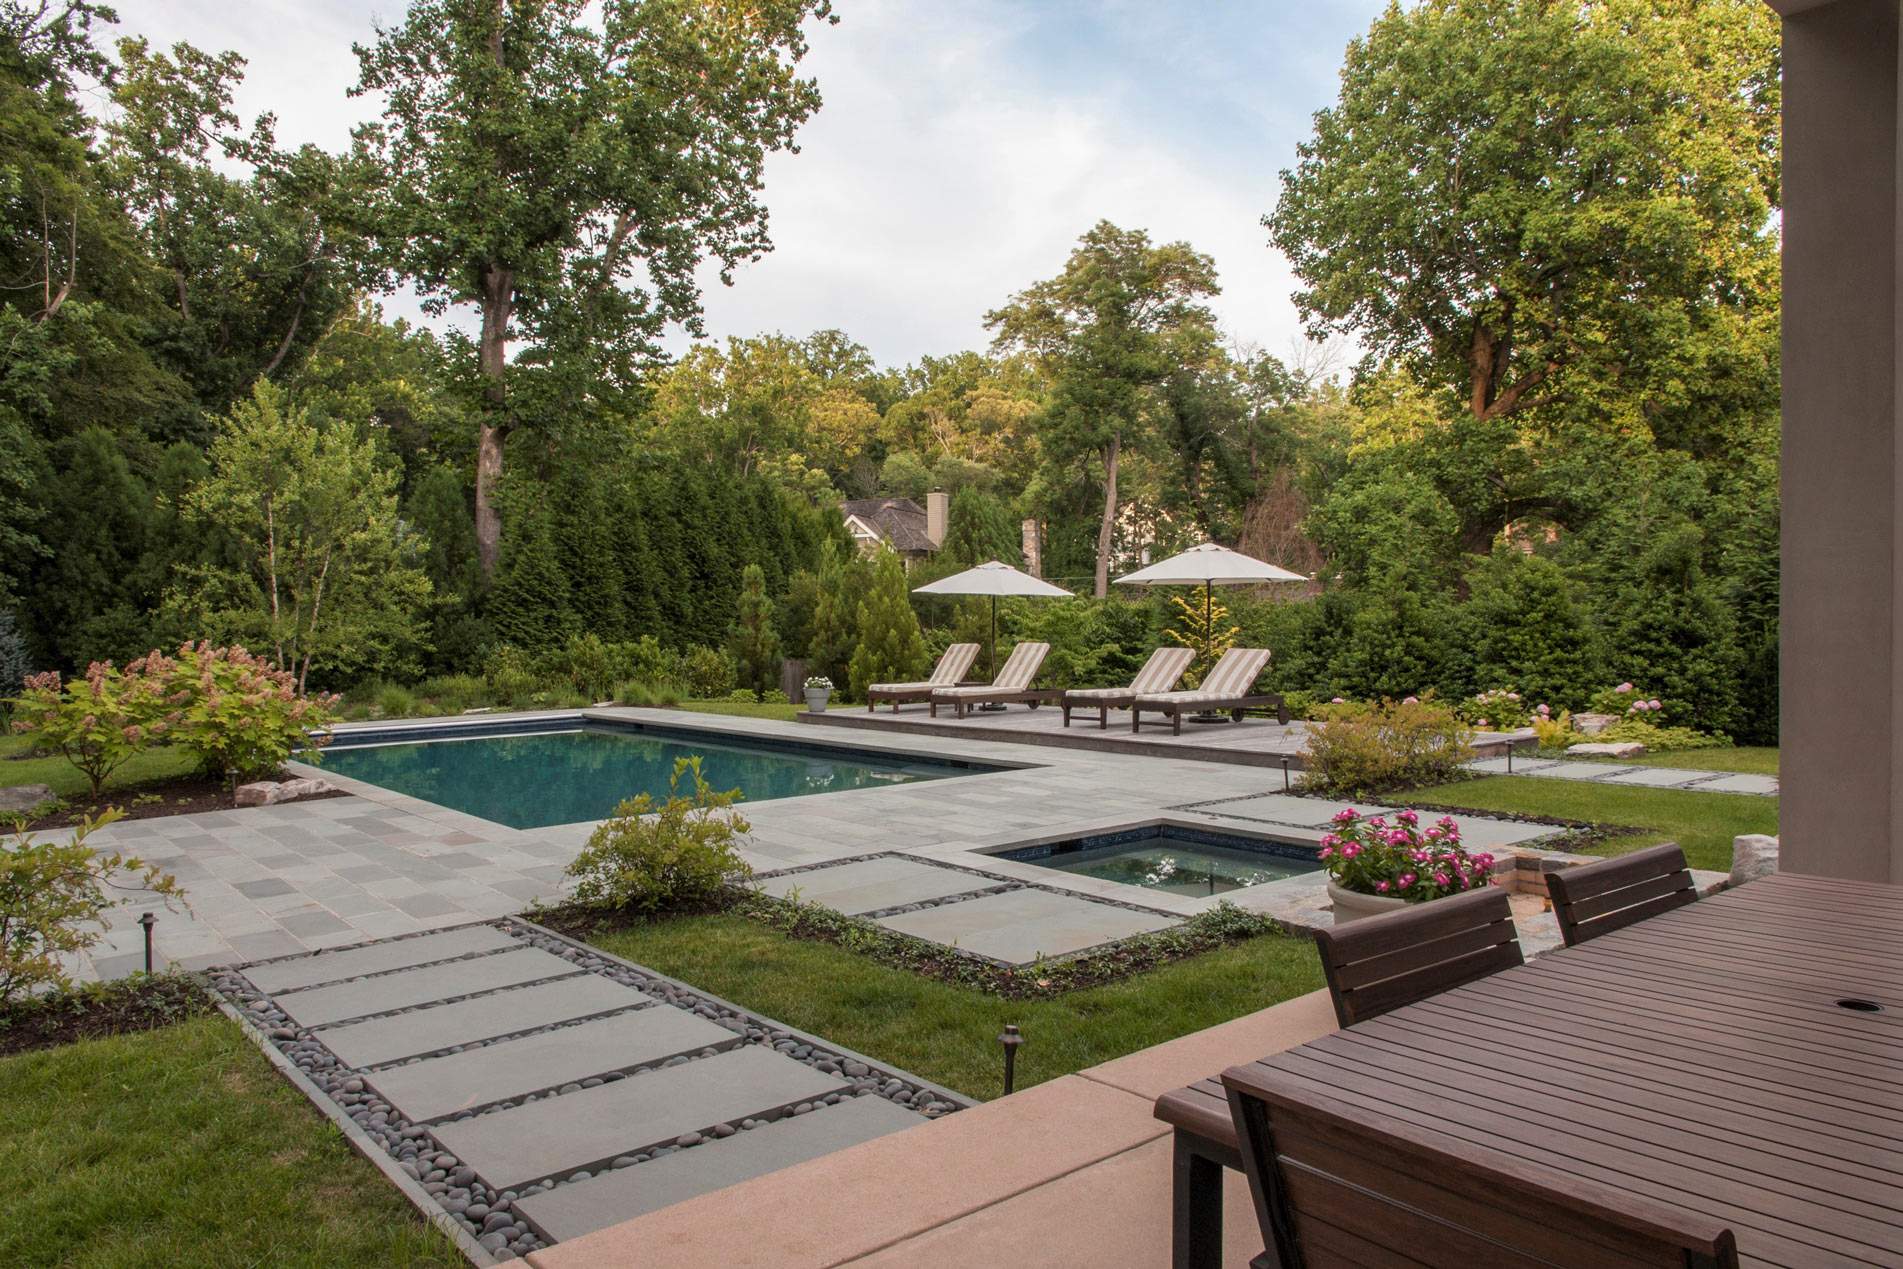 Backyard with Pool, Tile Path and Outdoor Seating